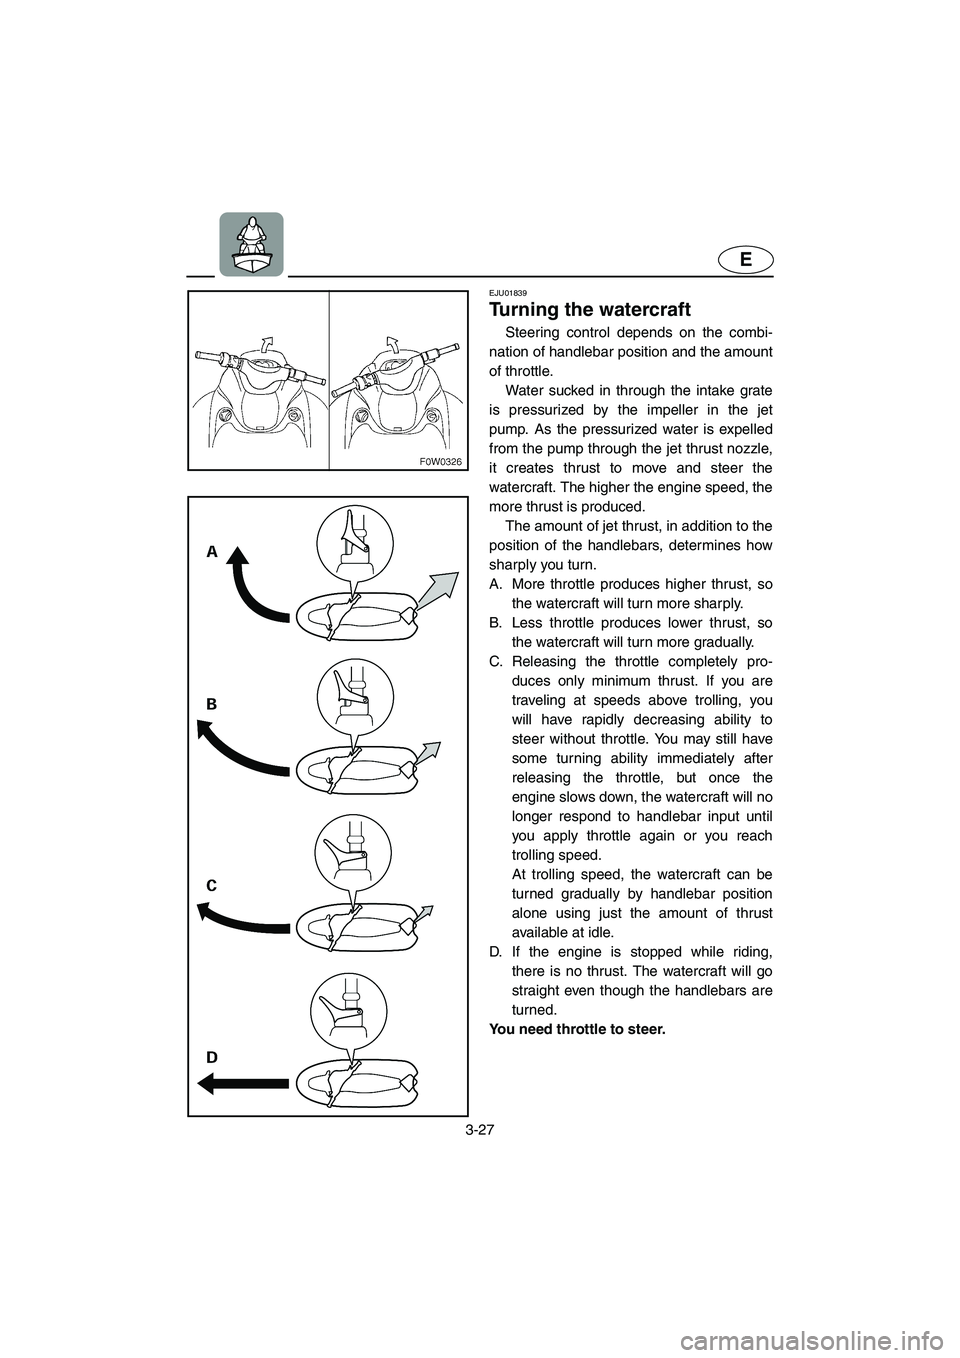 YAMAHA GP800R 2003  Owners Manual 3-27
E
EJU01839
Turning the watercraft 
Steering control depends on the combi-
nation of handlebar position and the amount
of throttle. 
Water sucked in through the intake grate
is pressurized by the 